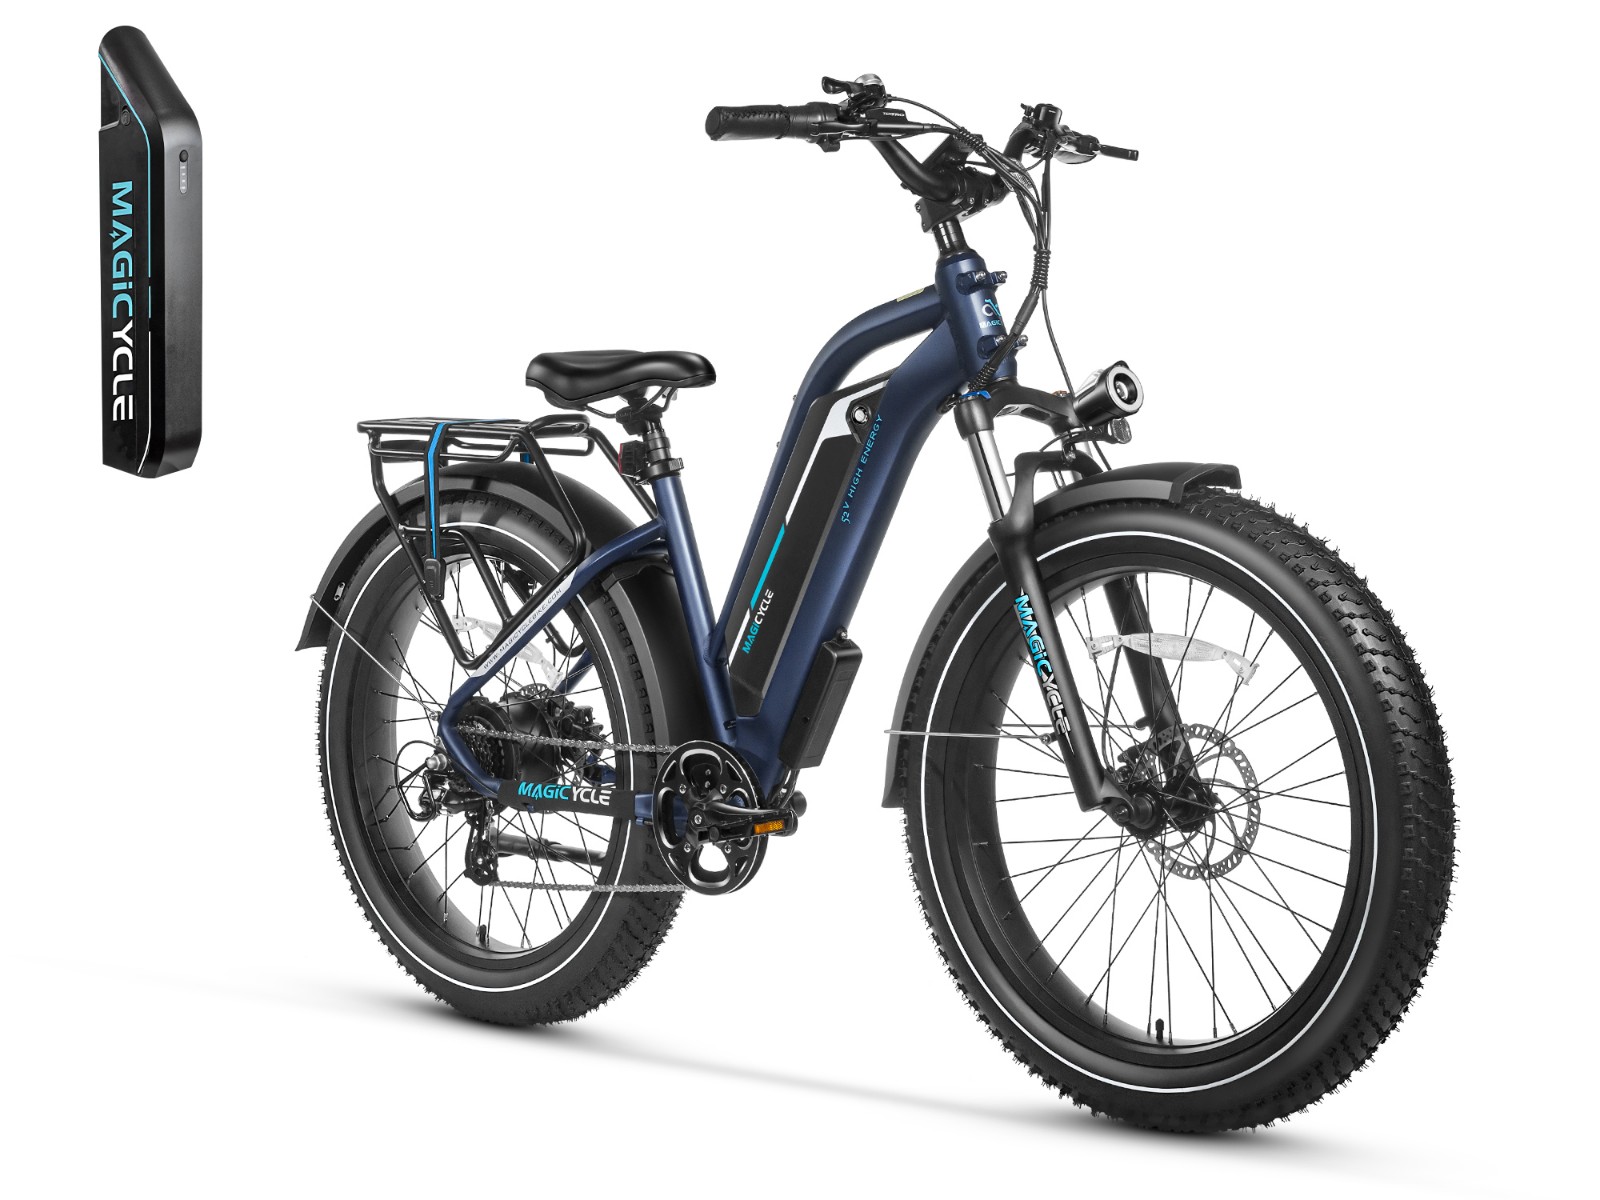 Combo Sale - Magicycle Cruiser Step-thru 52V 15Ah Ebike with Second 52V 15Ah Battery - Canada Only